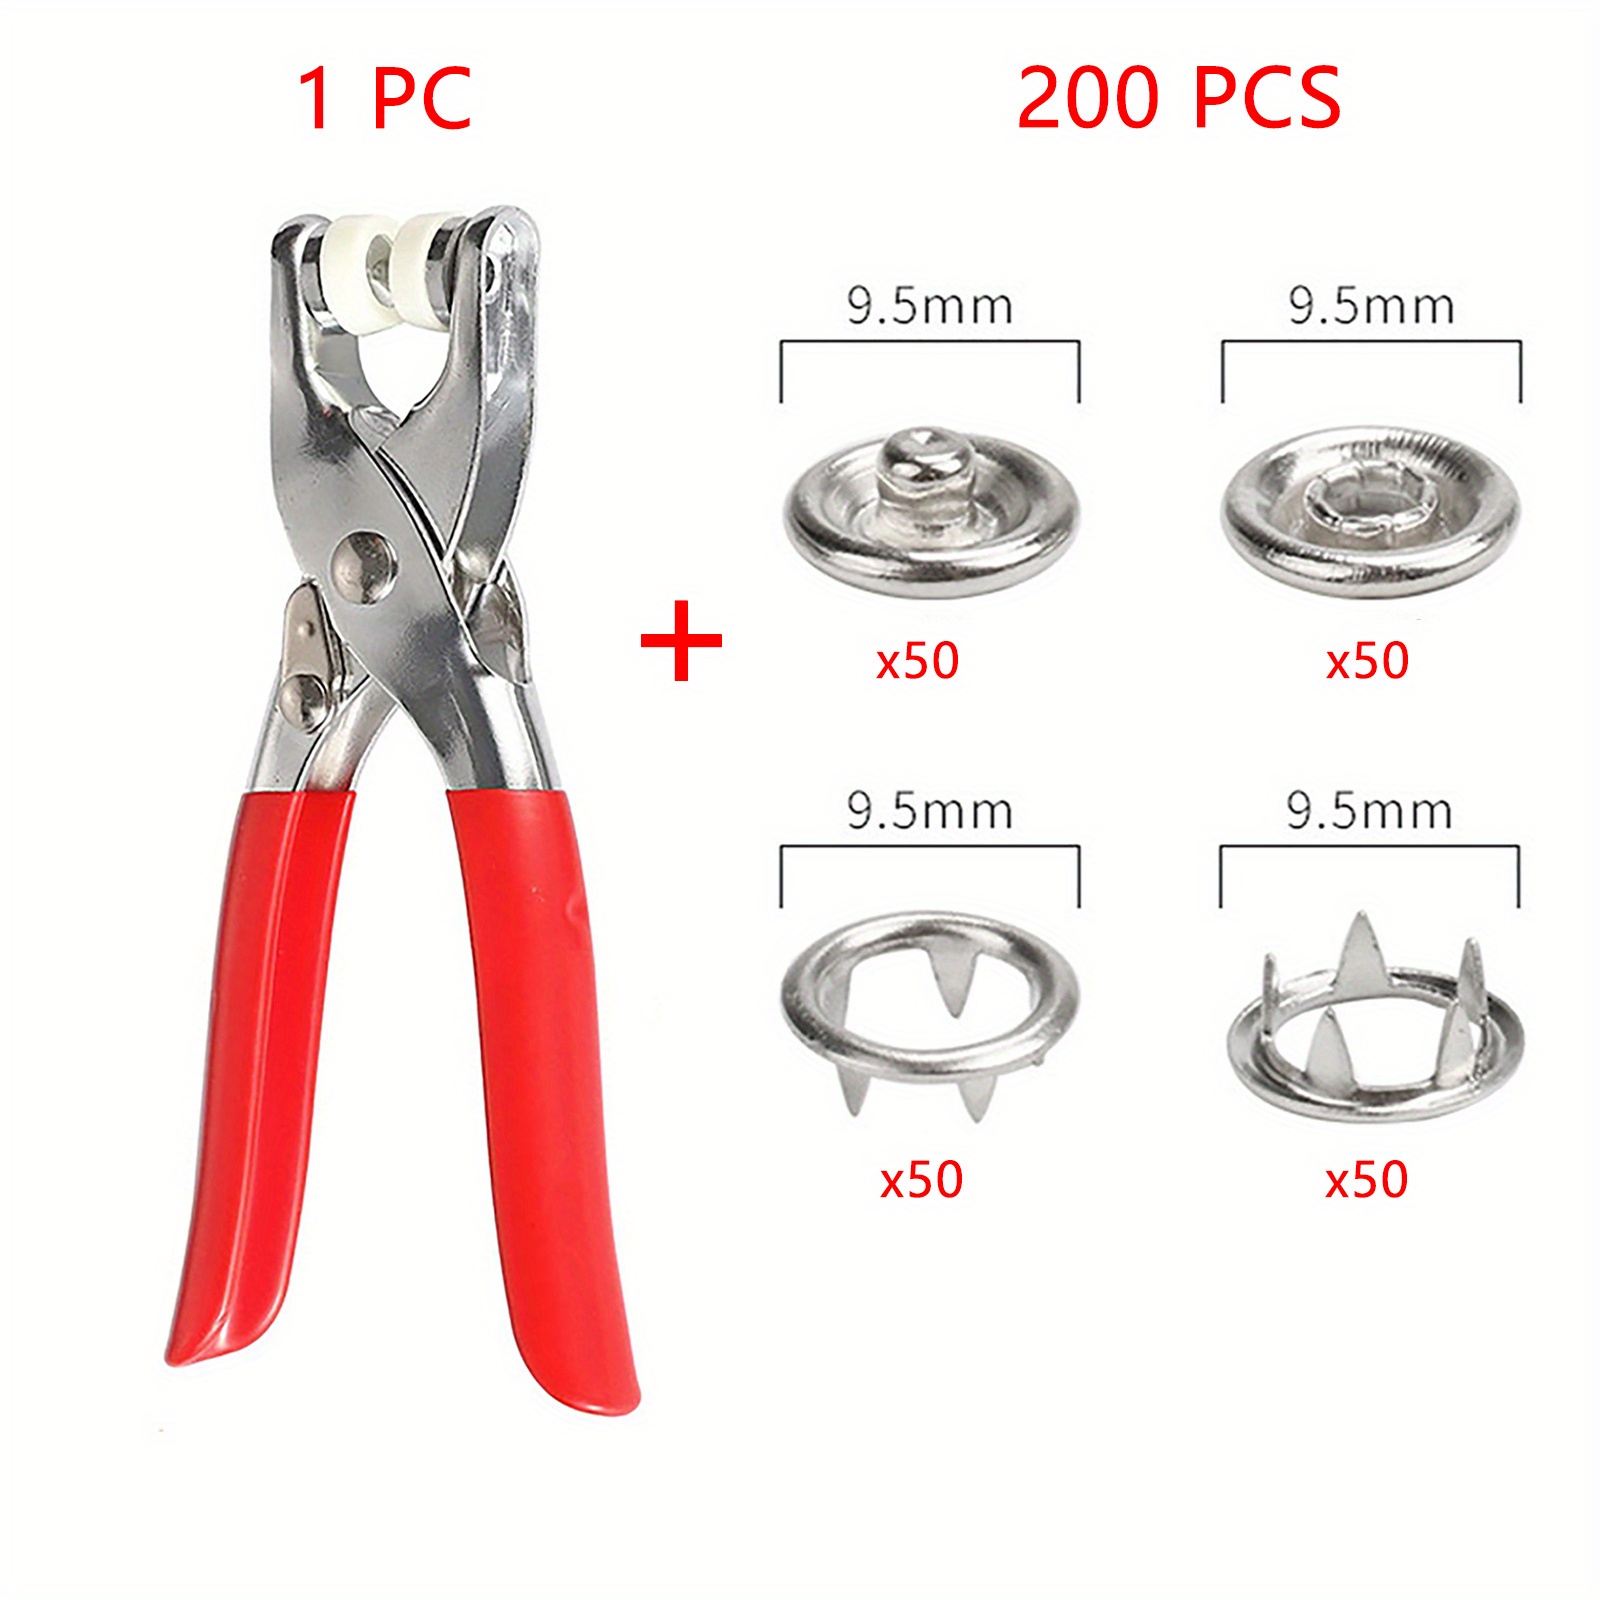 Prong Pliers Ring Press Studs Snap Buttons Popper Fasteners DIY